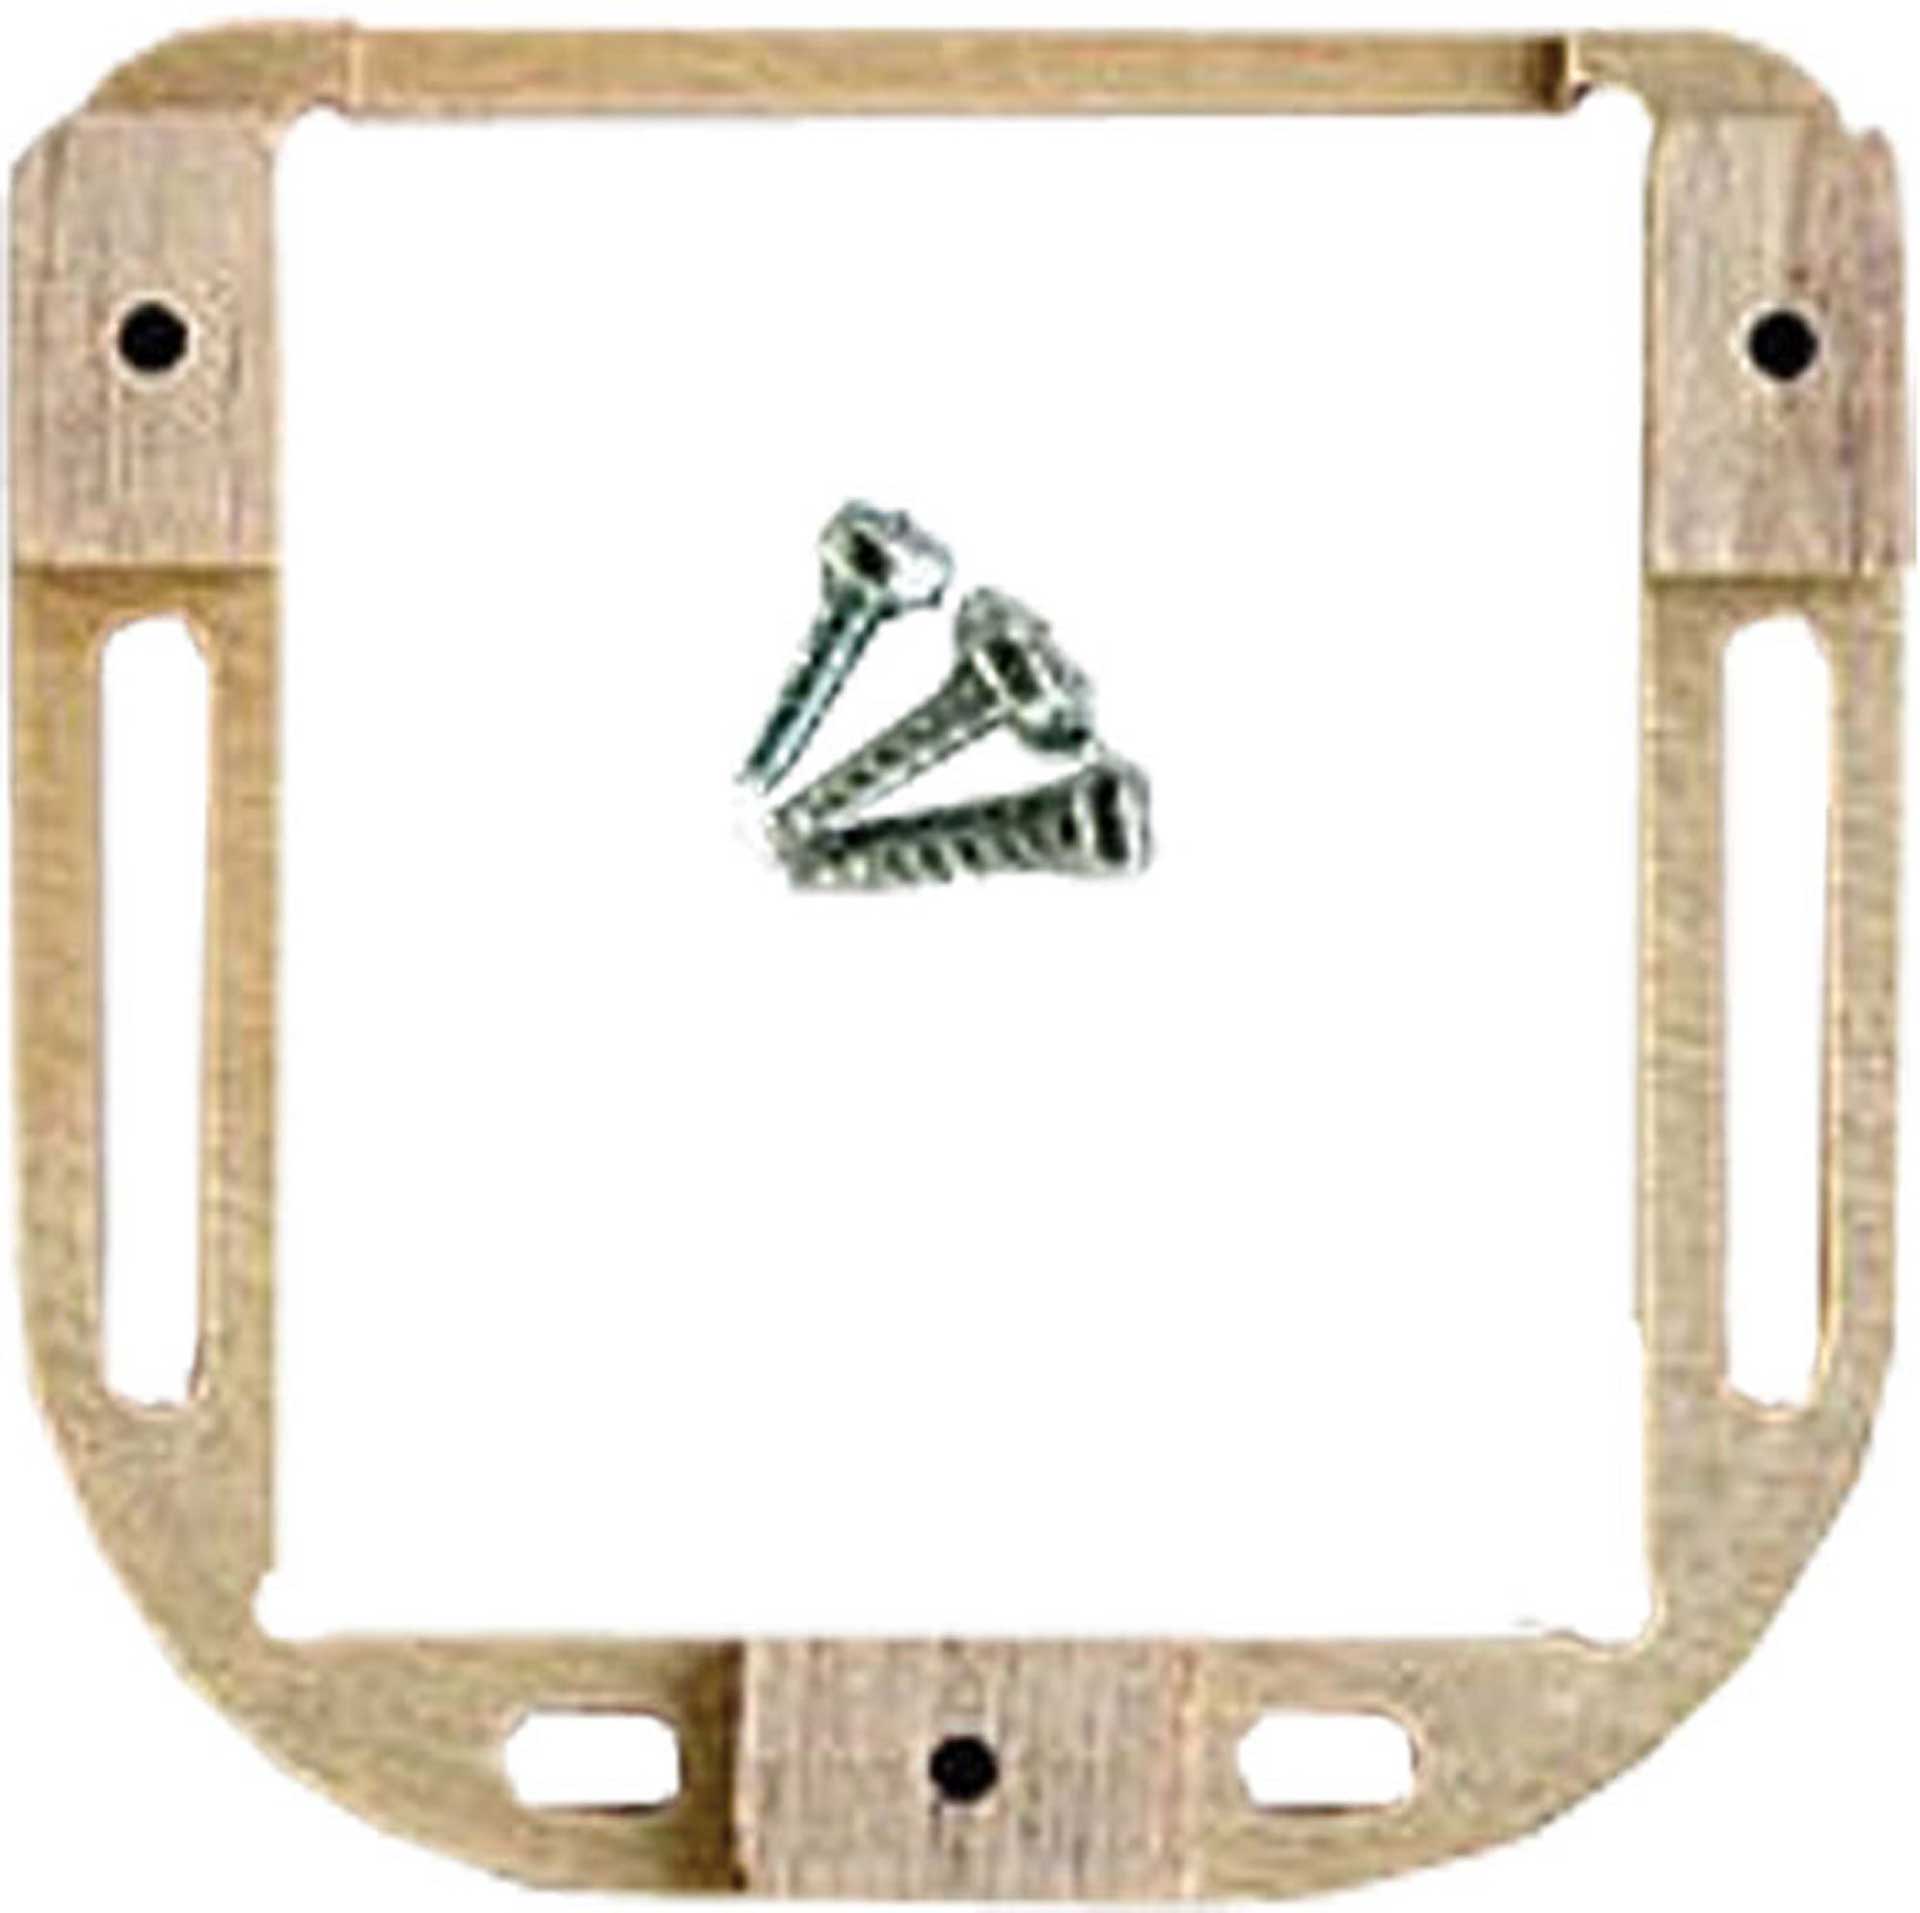 RCSOLUTIONS SERVO FRAME HS-125MG / 5125MG / DS 3210 AND SIMILAR